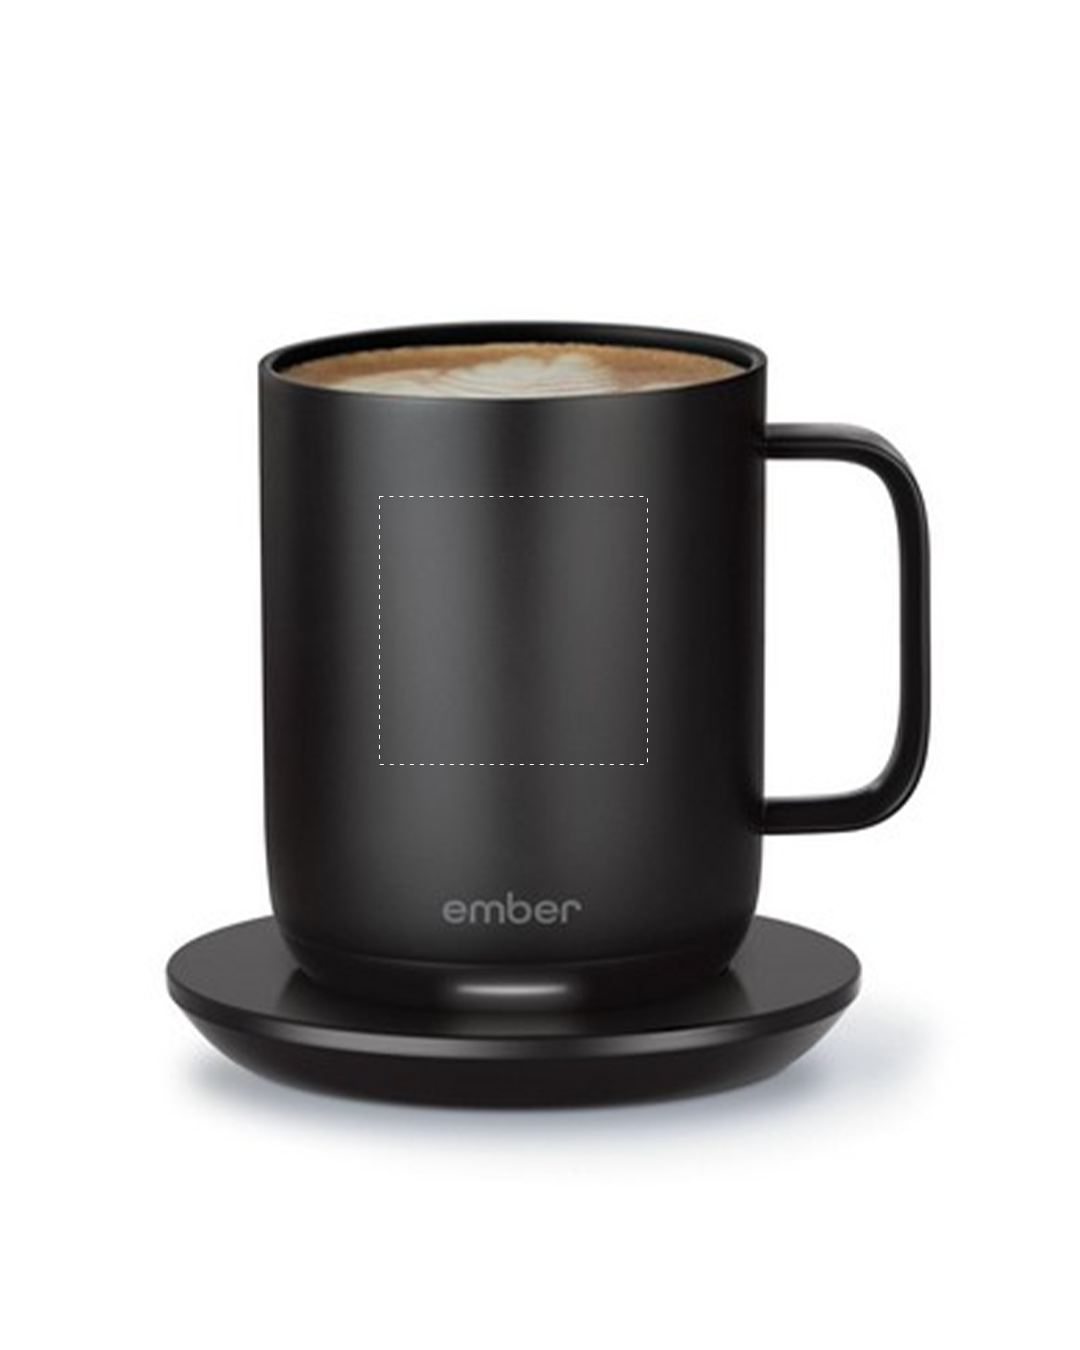 Coffee Mugs That Keep Coffee Hot Archives